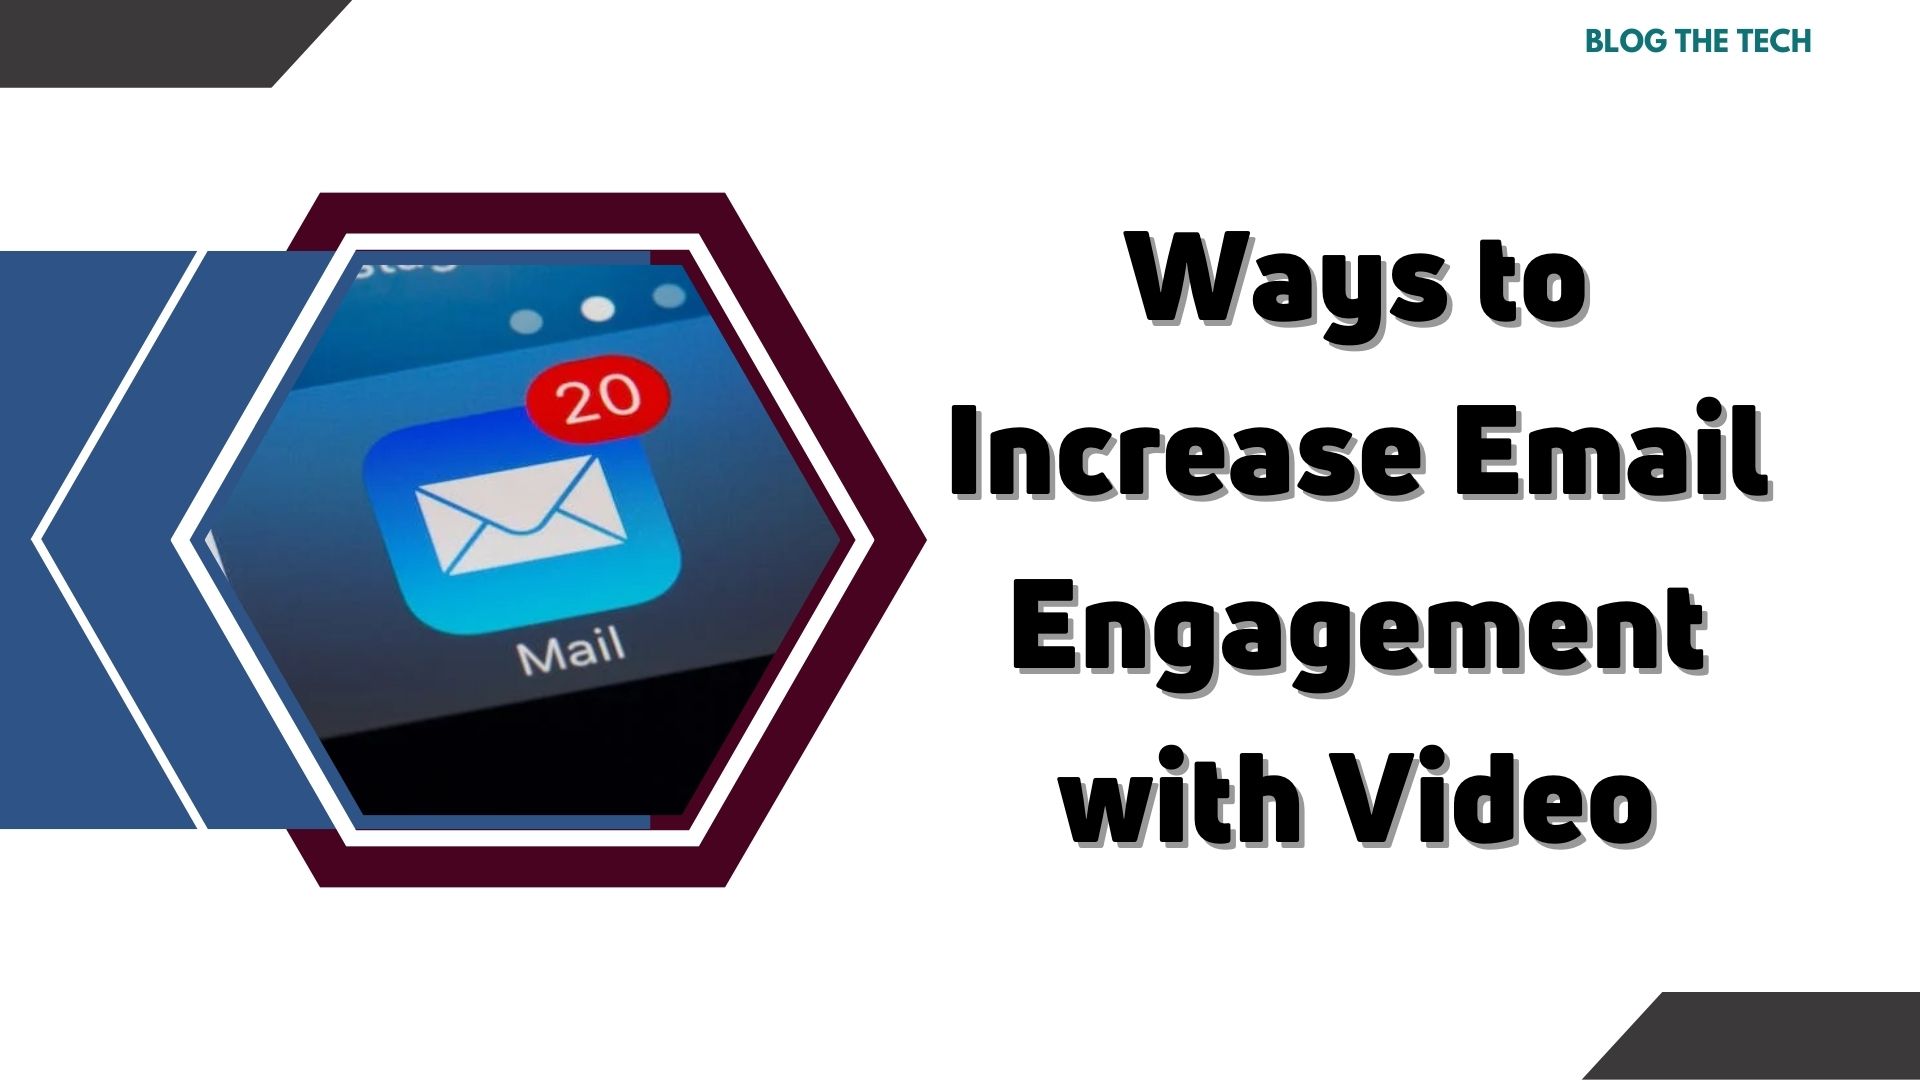 Ways to Increase Email Engagement with Video